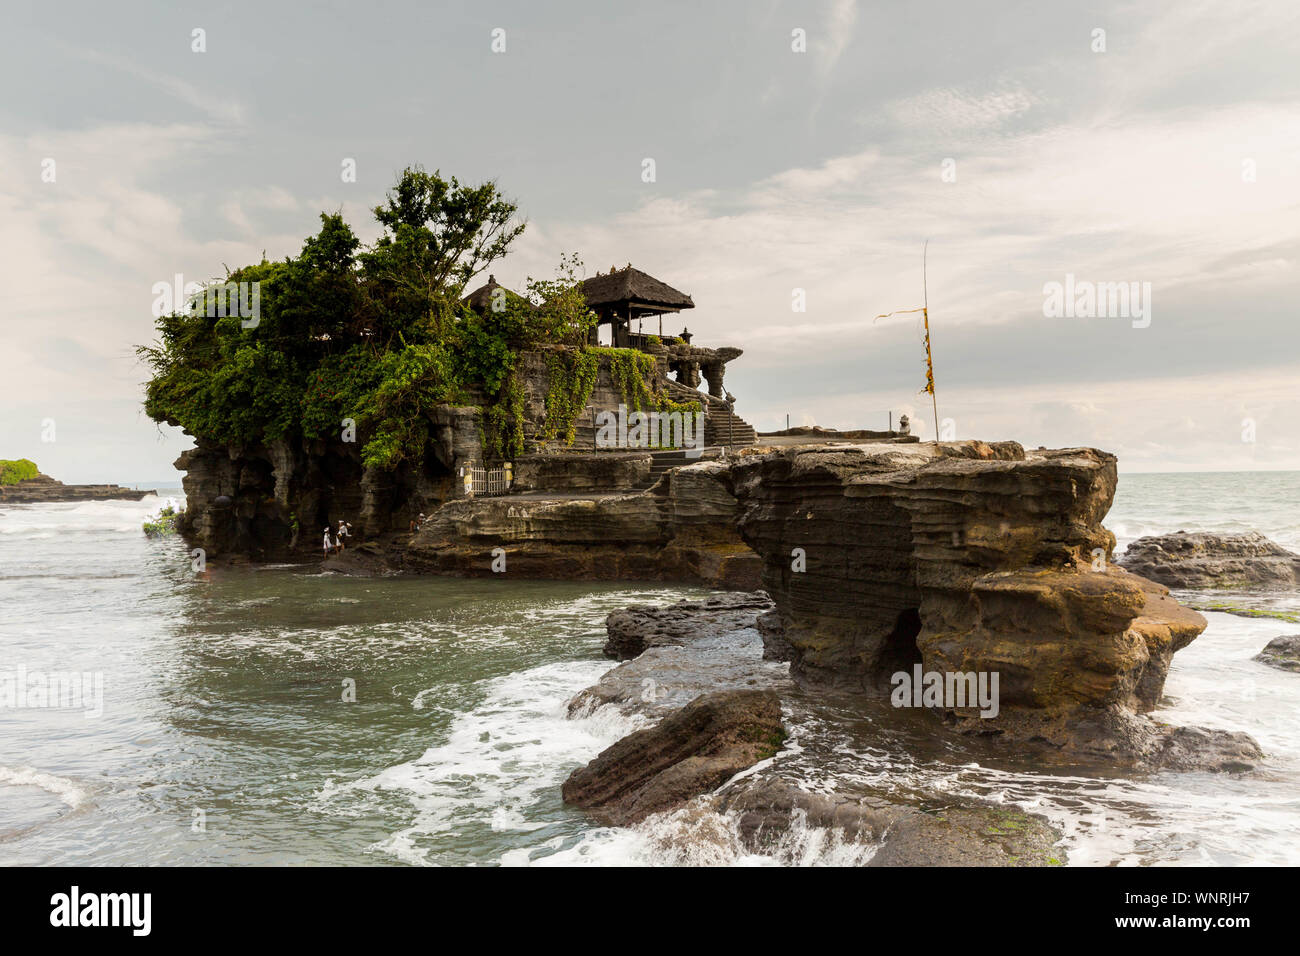 Built Structure On Cliff By Sea Against Sky Stock Photo